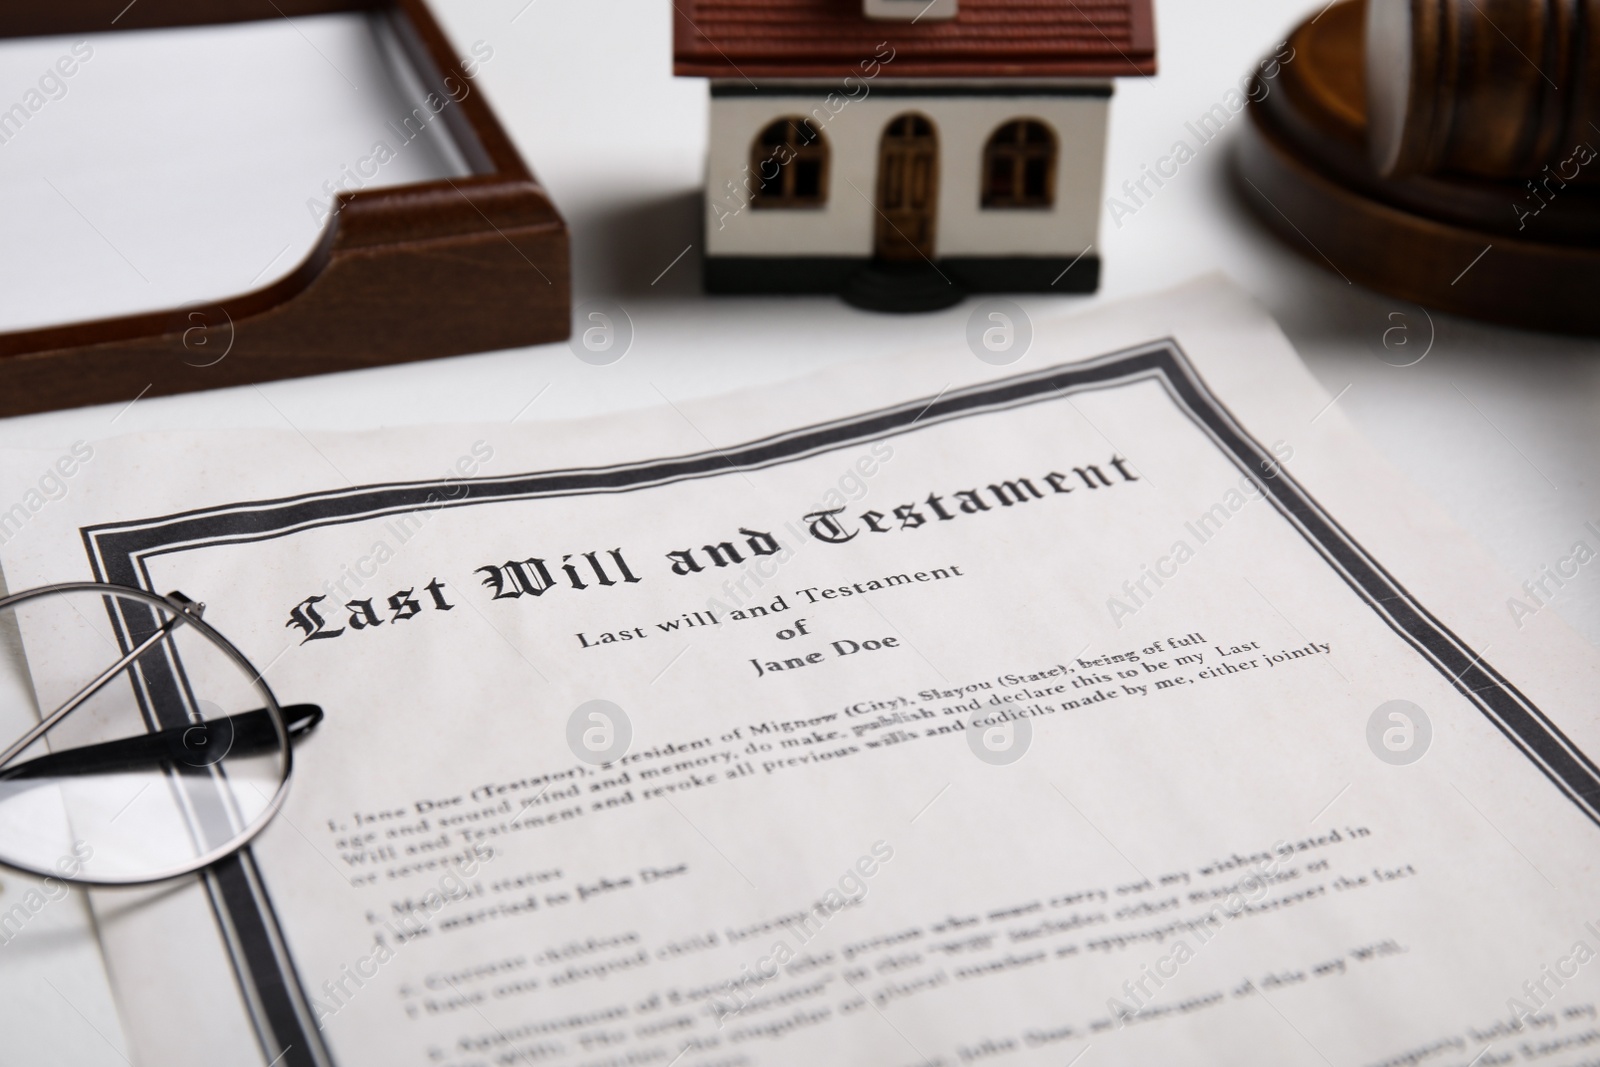 Photo of Last will and testament near house model, glasses on white table, closeup